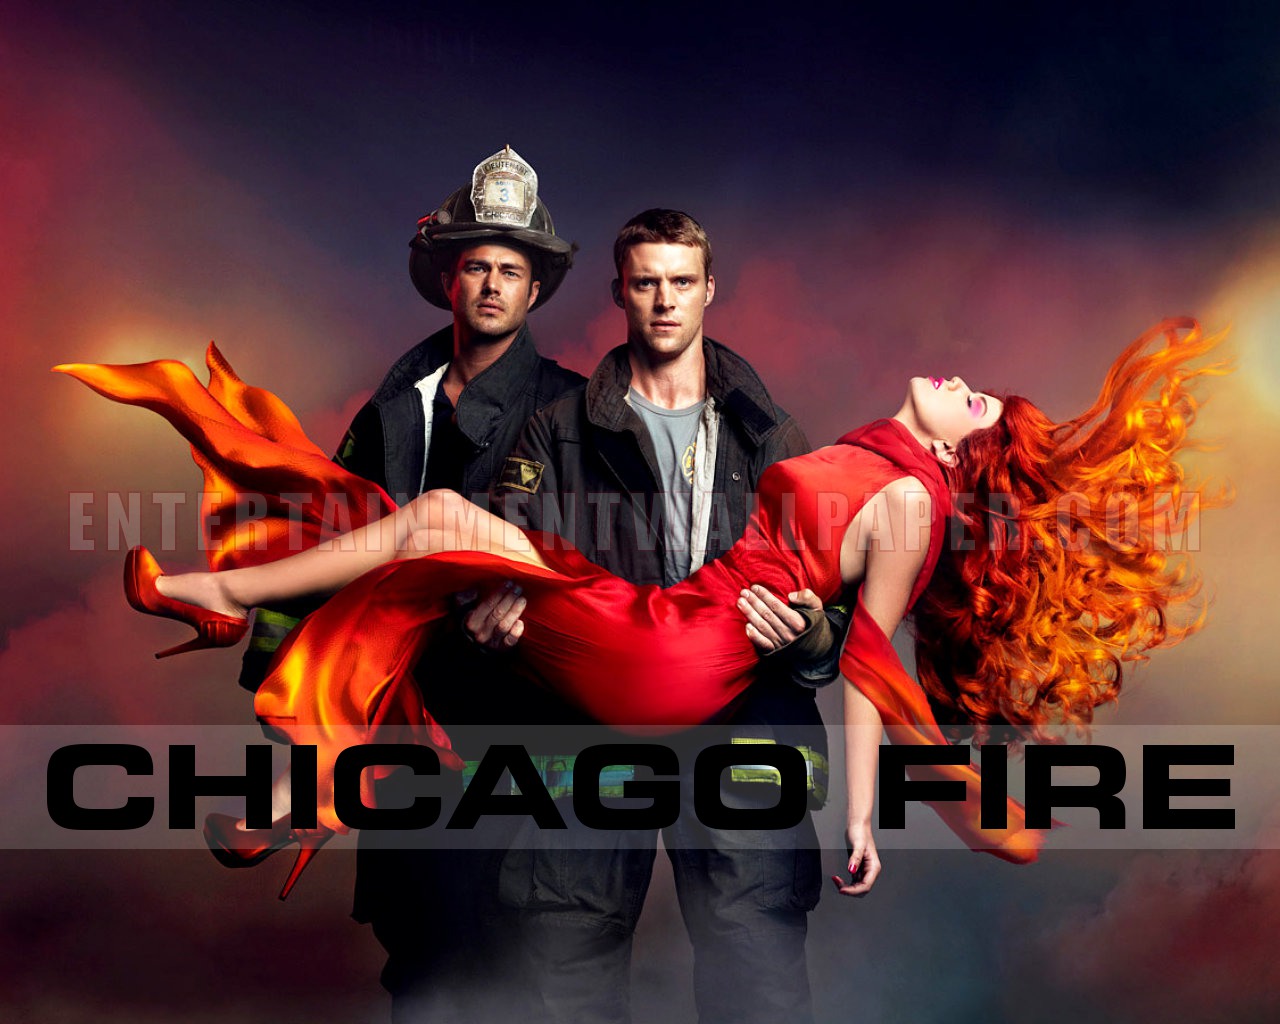 chicago fire HD wallpapers backgrounds